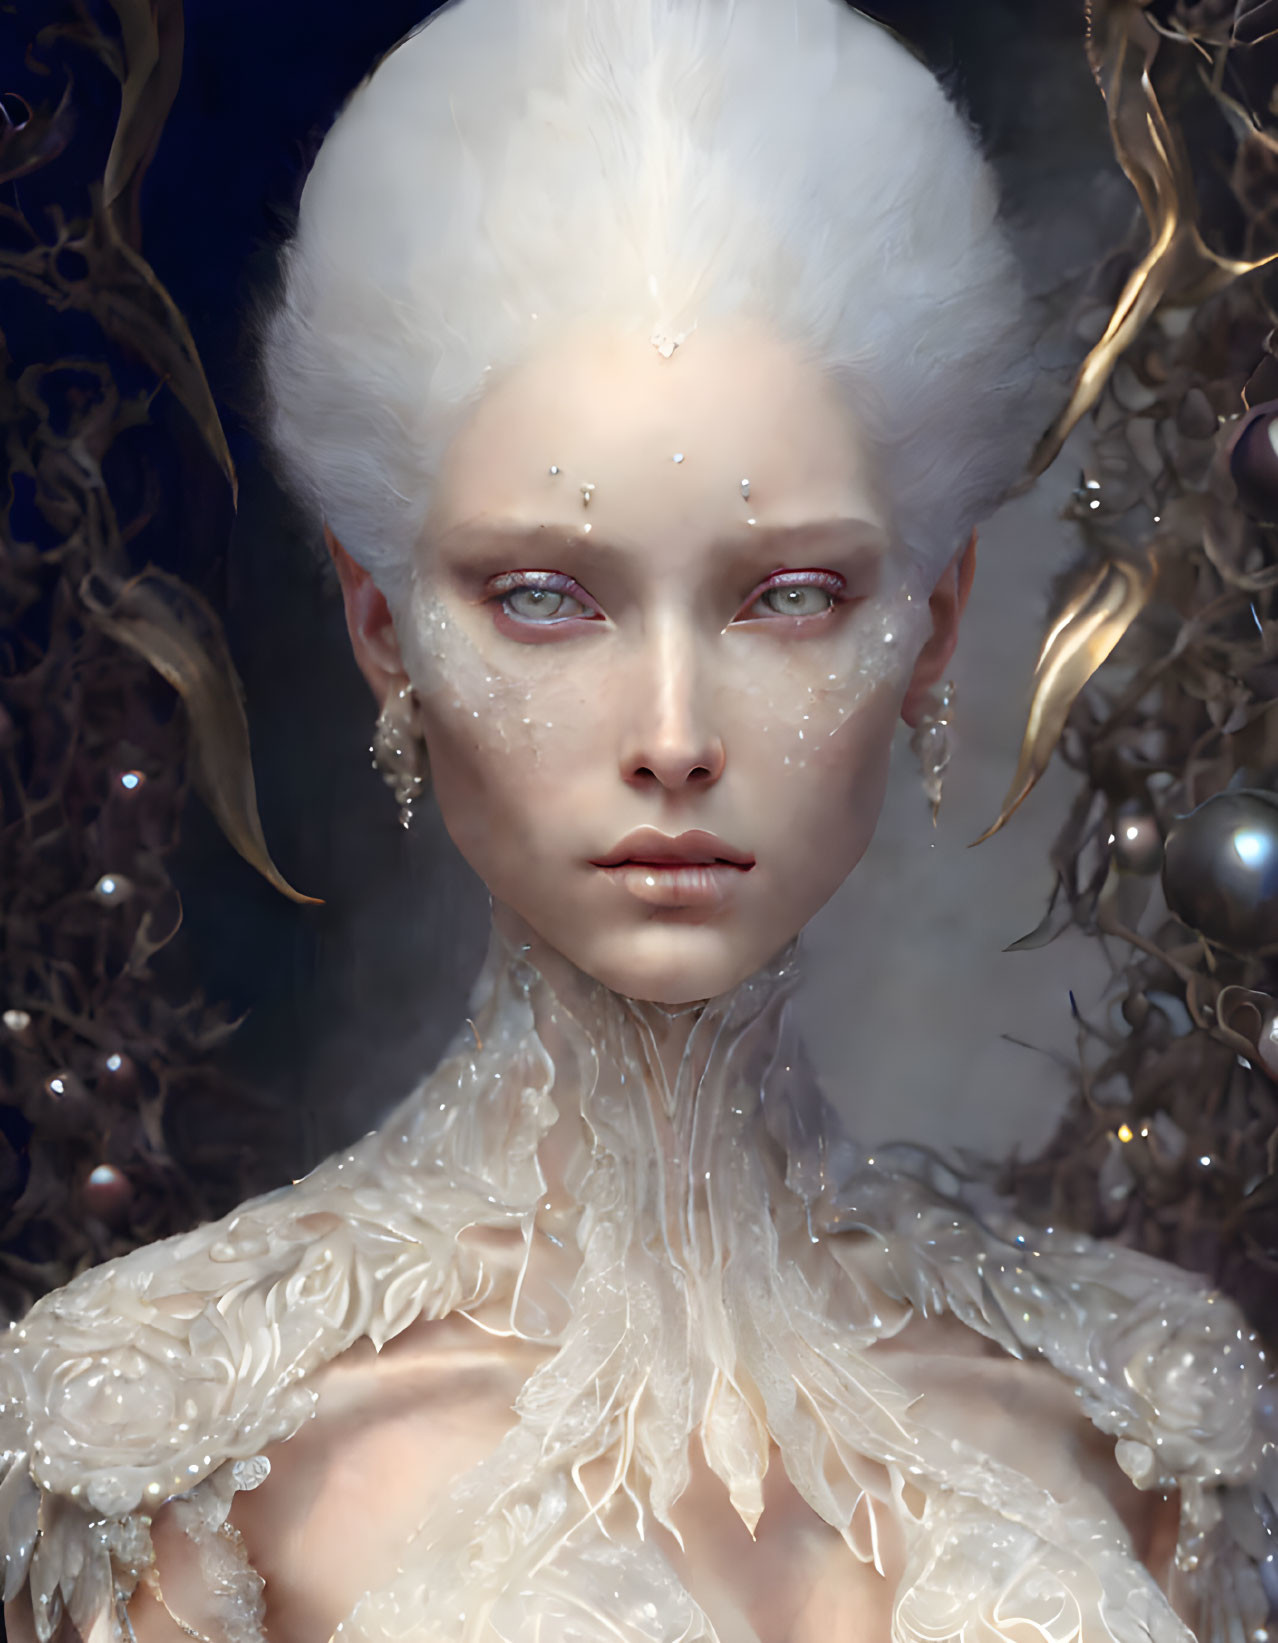 Pale-skinned female figure with red eyes and ornate white headdress in mystical setting